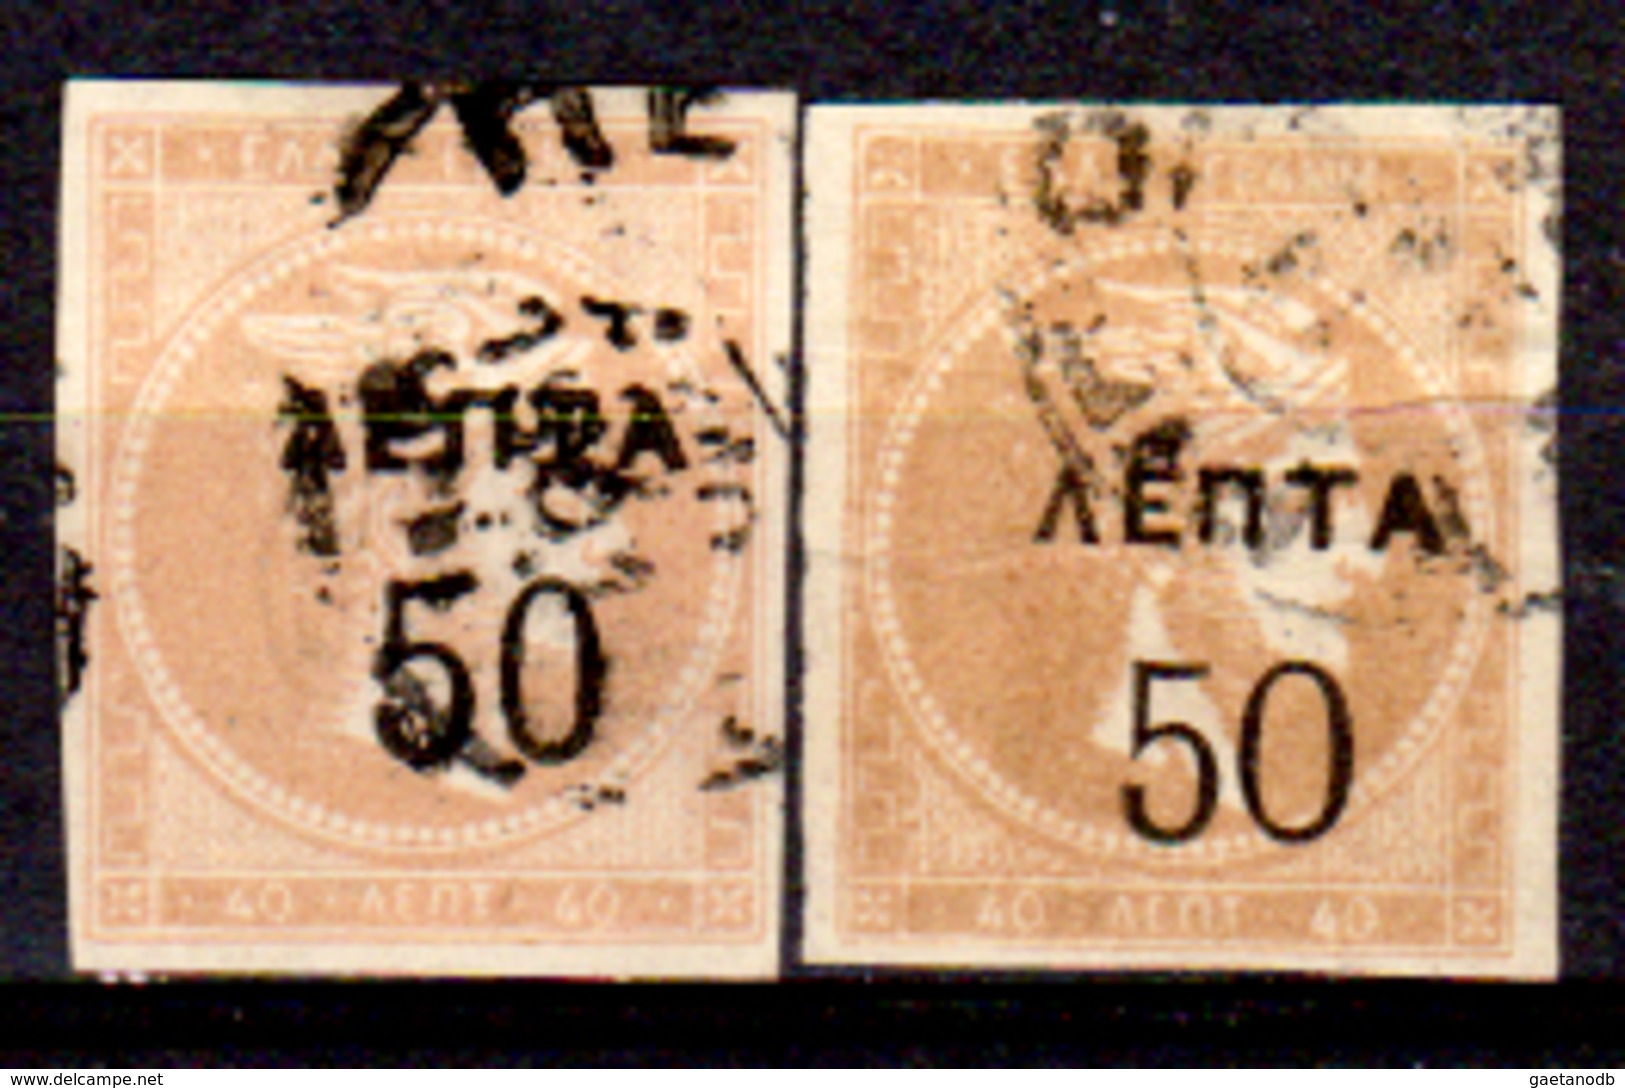 Grecia-F0158 - 1900 - Yvert & Tellier N. 115, 115a (o) Used - Senza Difetti Occulti. - Used Stamps